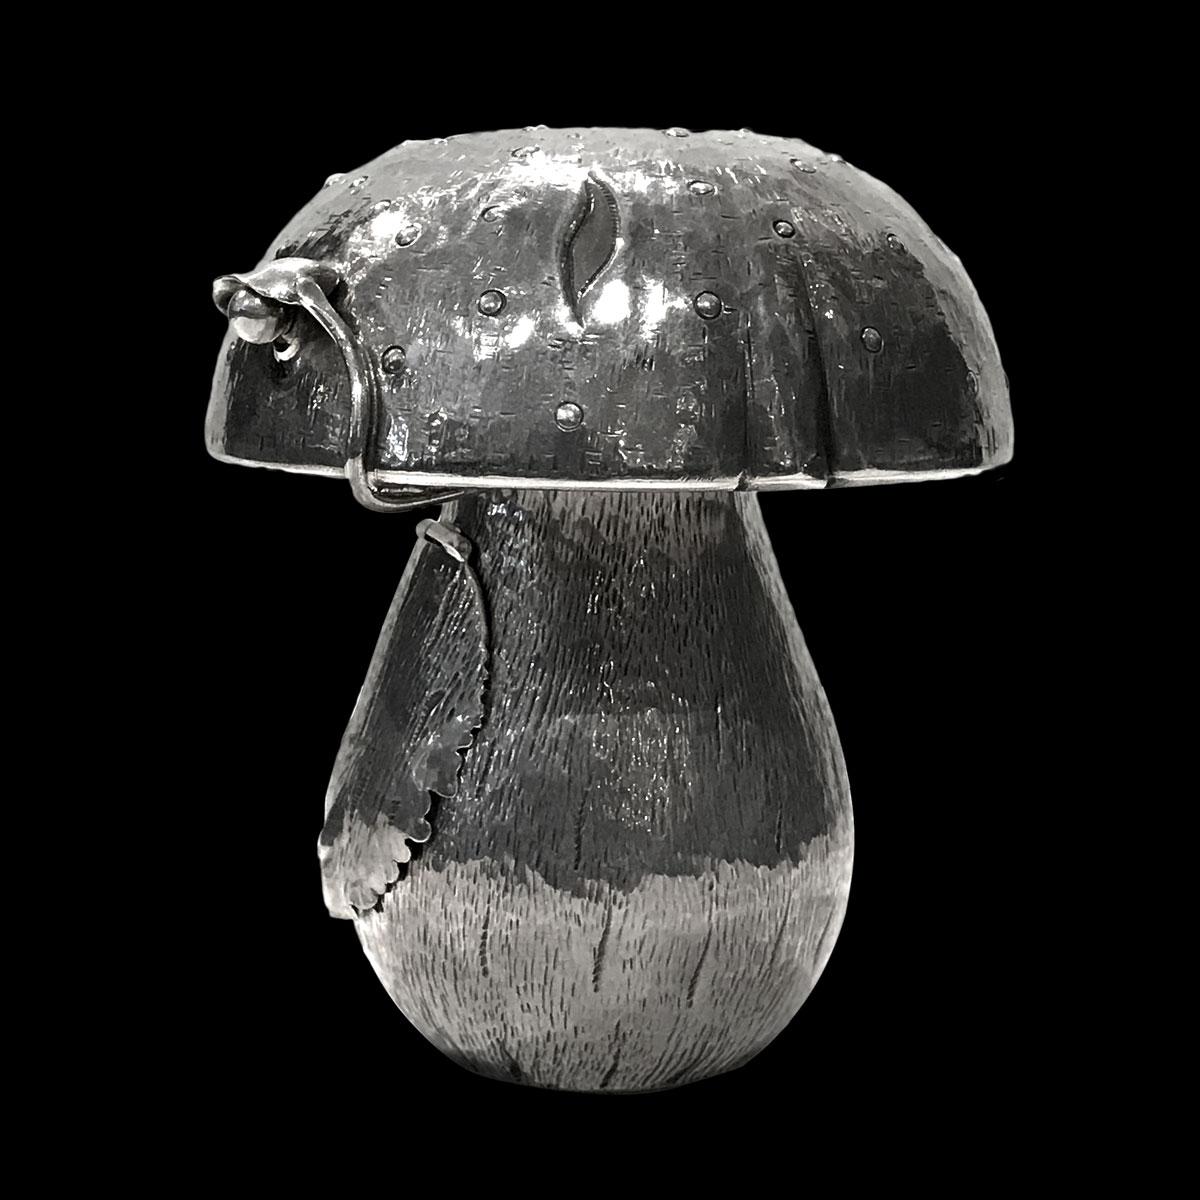 This very original and decorative mushroom pepper mill in the Buccellati style is made of sterling silver. Looking like a porcini mushroom, this pepper mill is finely chiseled with nice details and reliefs. On one side, a hinge-mounted magnetic